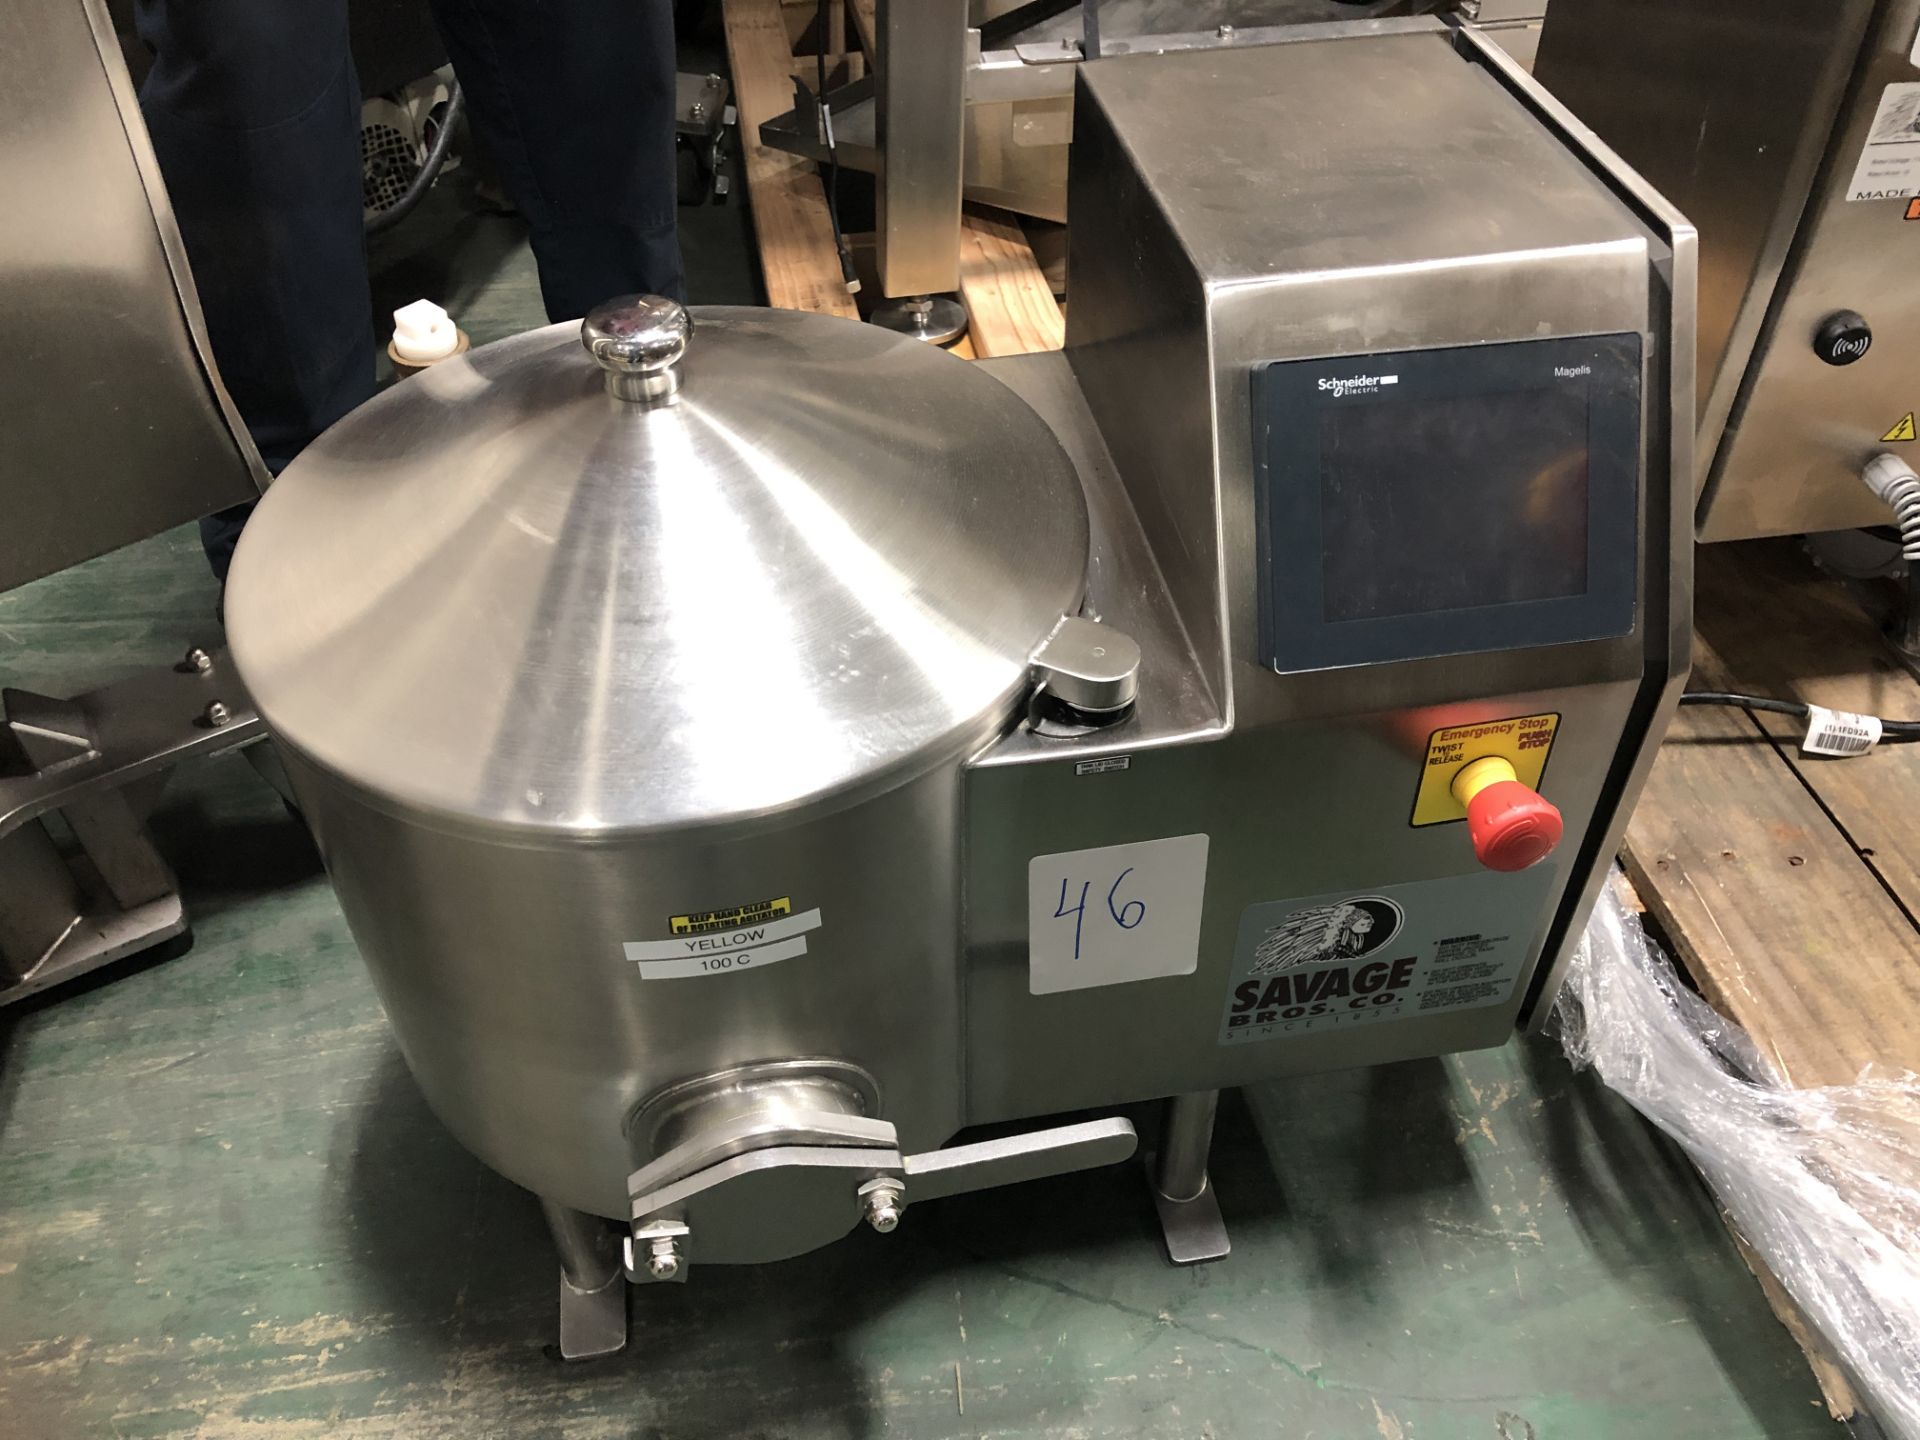 Savage 50-lb Stainless Steel Chocolate Melter, model 0934-40, jacketed and agitated, electrically